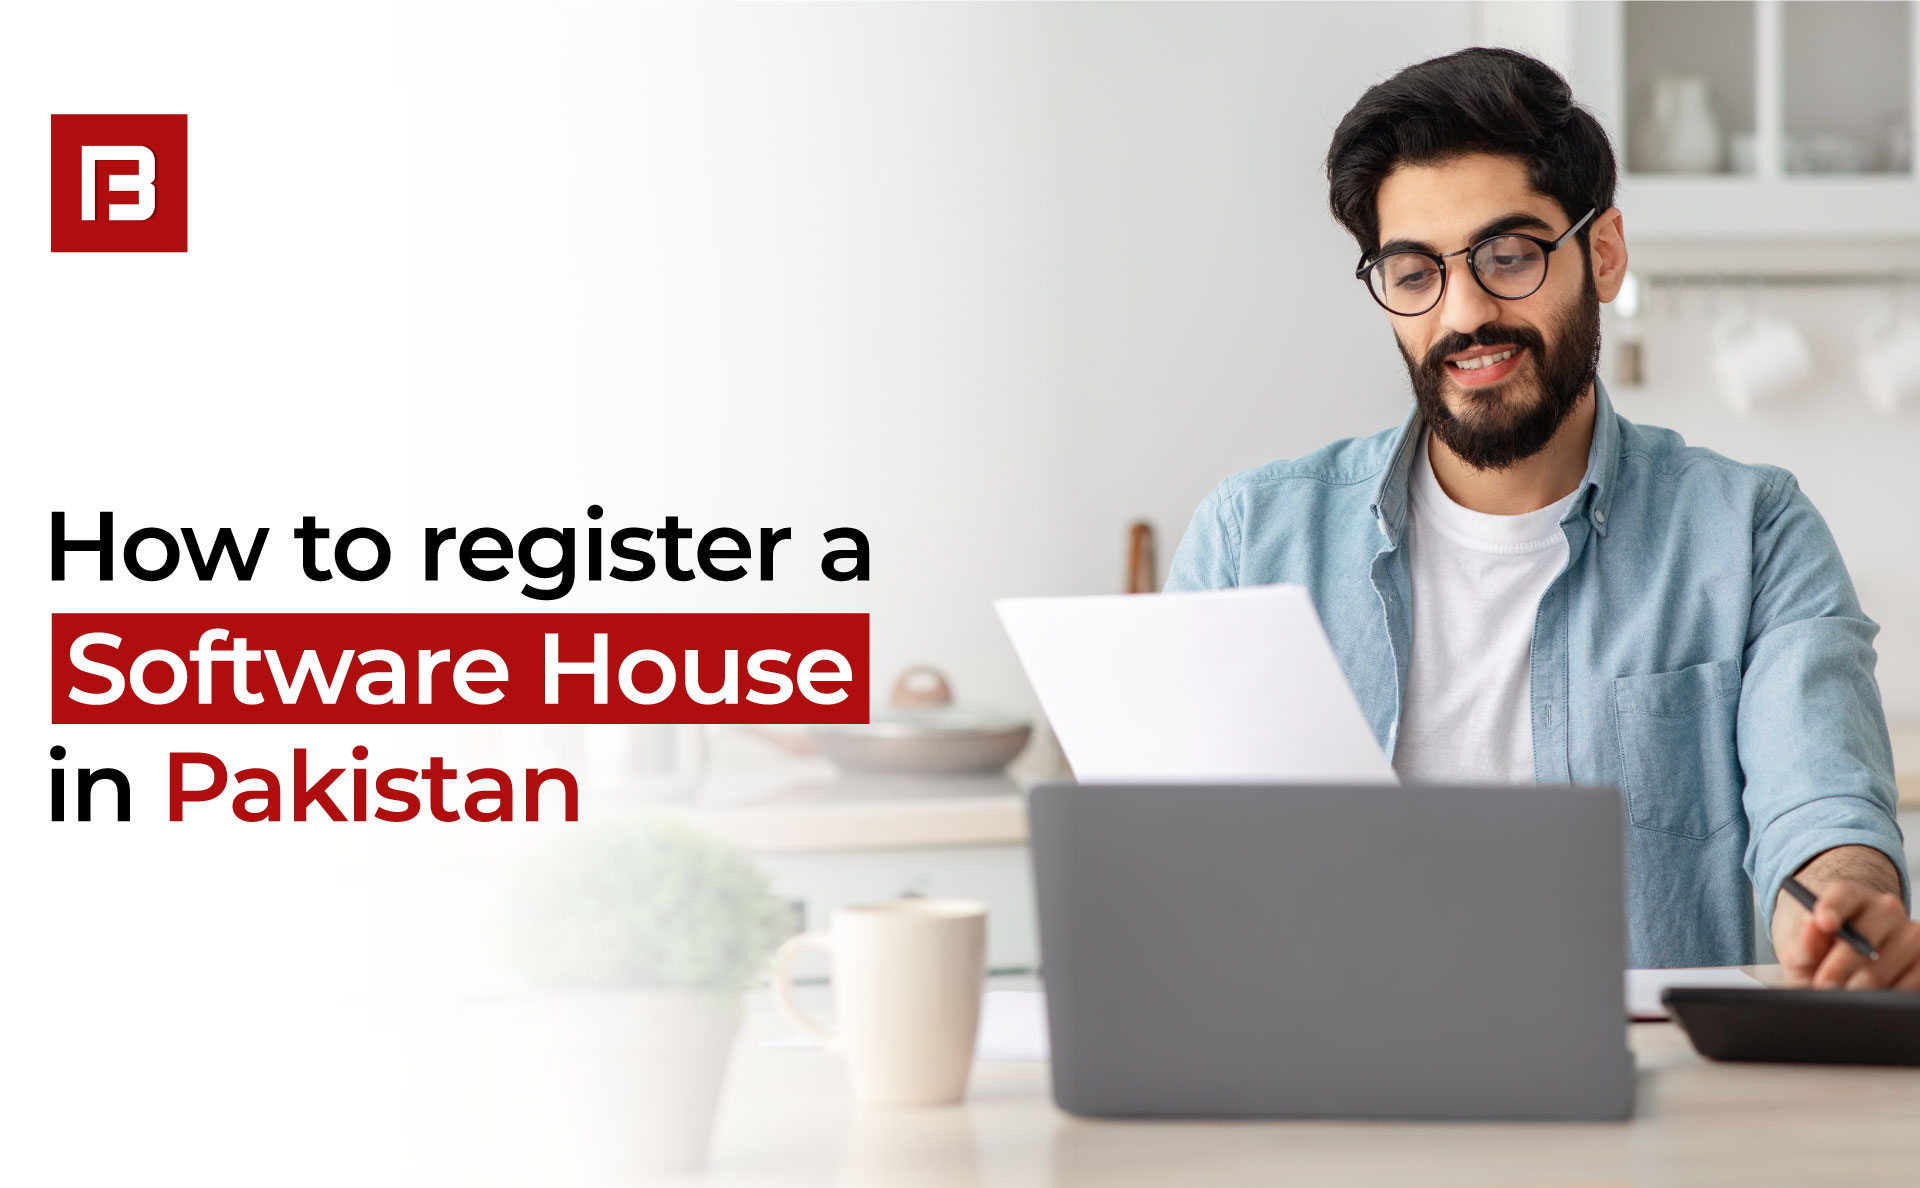 How to Register a Software House in Pakistan